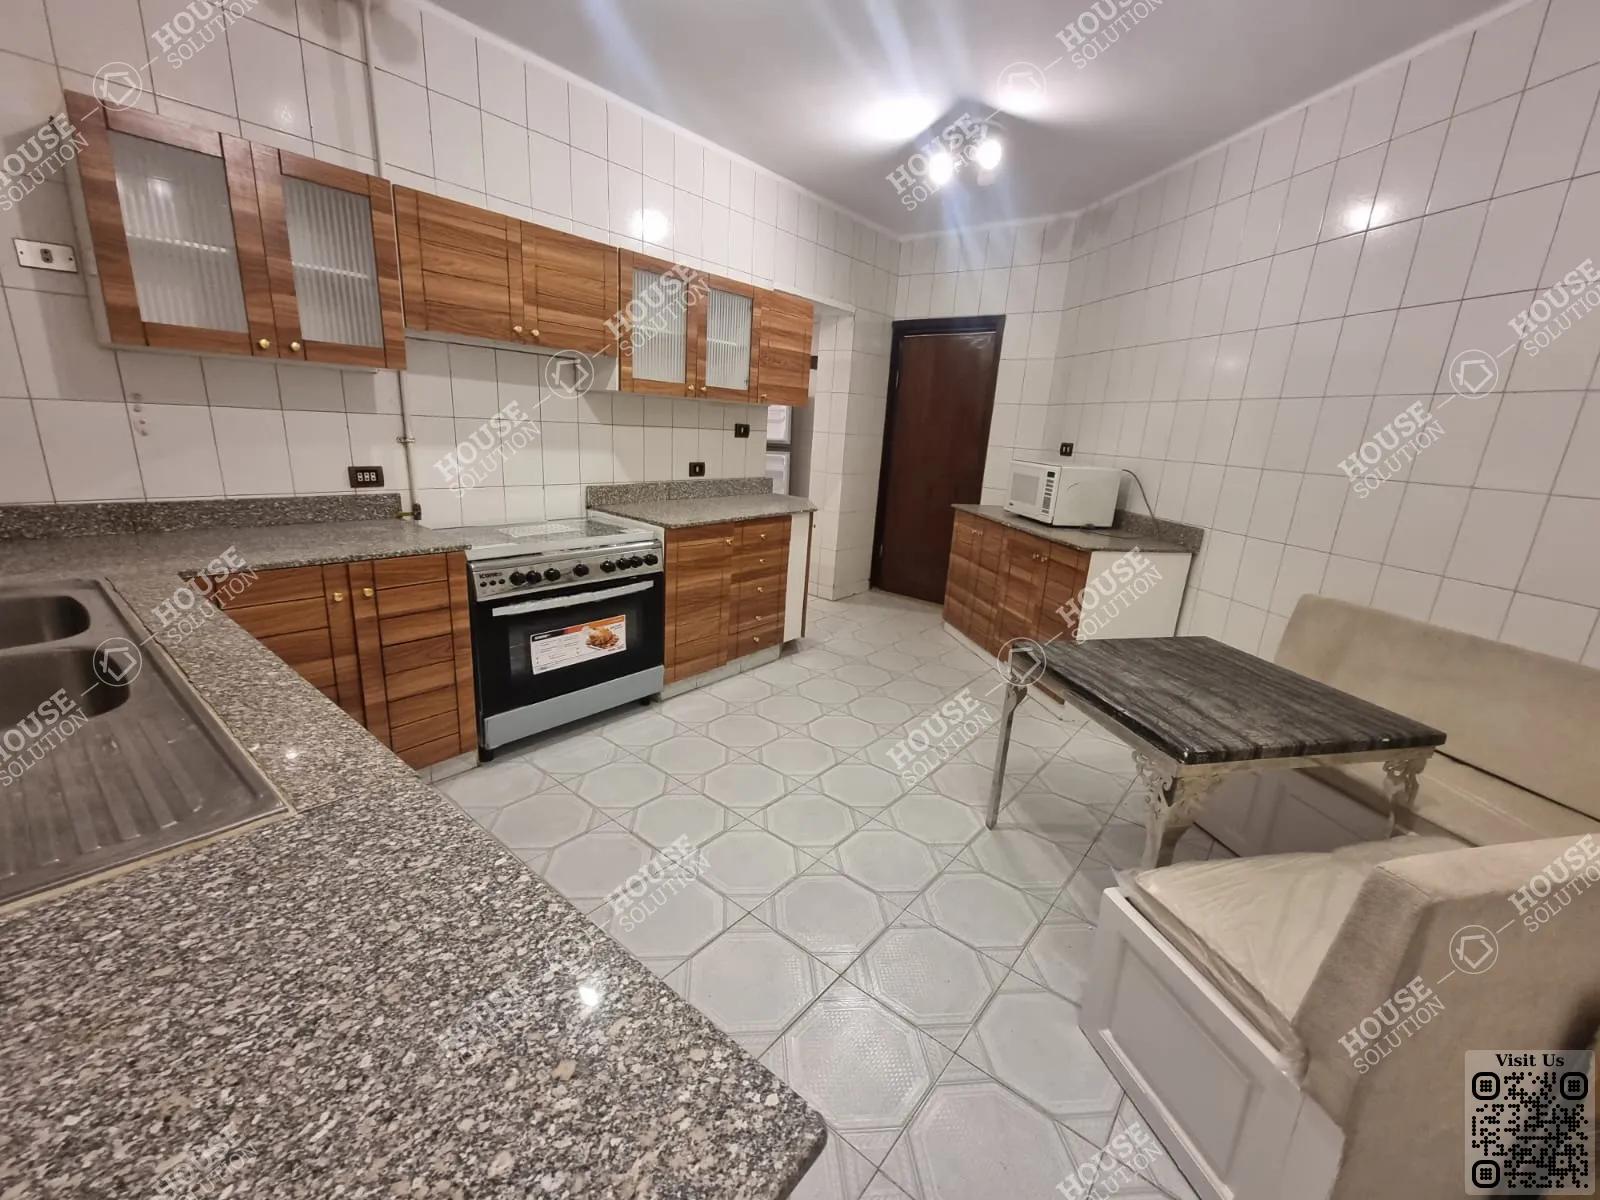 KITCHEN  @ Apartments For Rent In Maadi Maadi Sarayat Area: 300 m² consists of 4 Bedrooms 3 Bathrooms Furnished 5 stars #5361-1